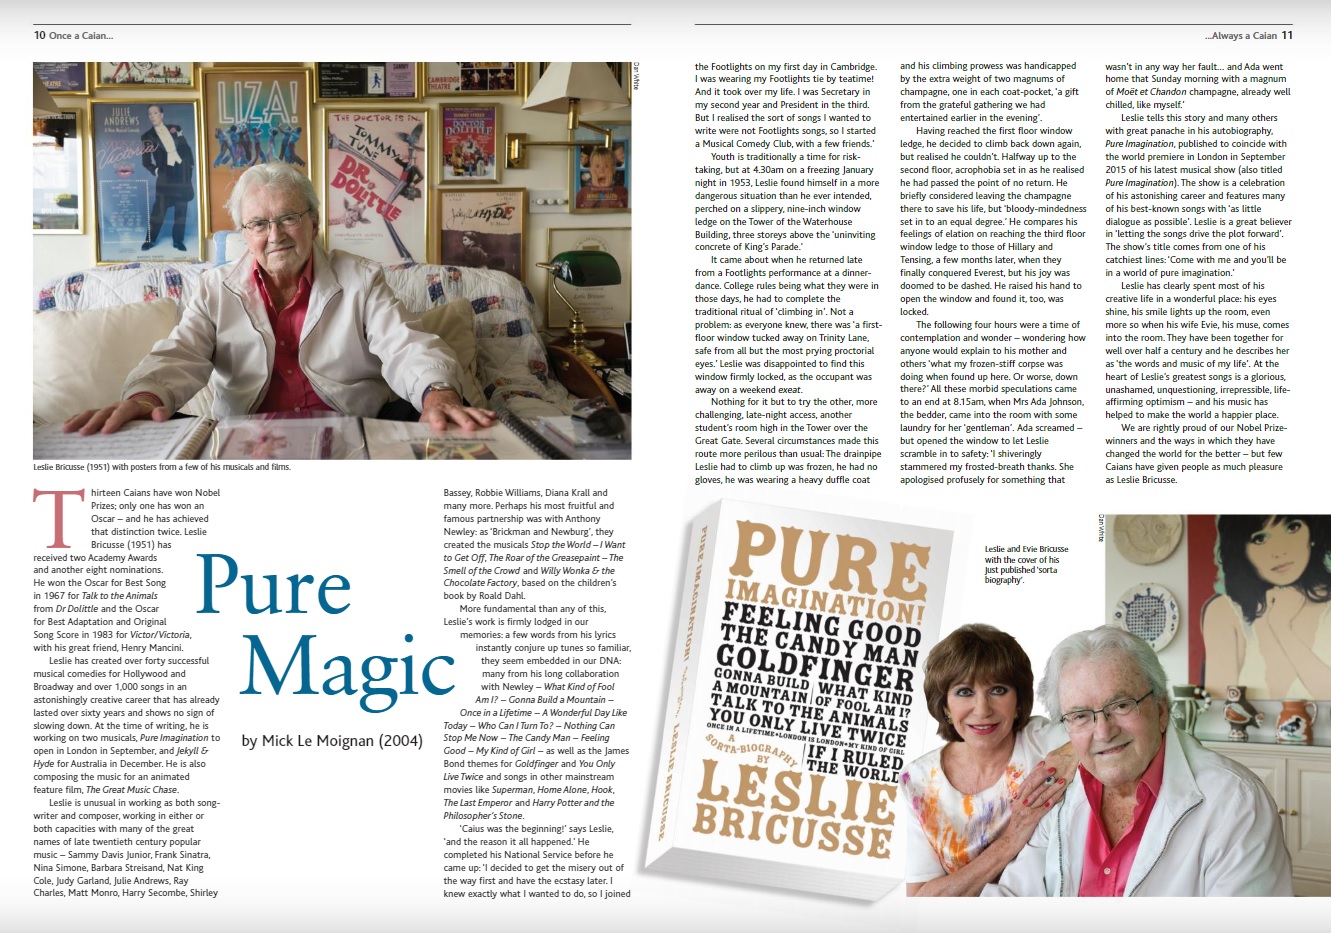 An article on Leslie Bricusse